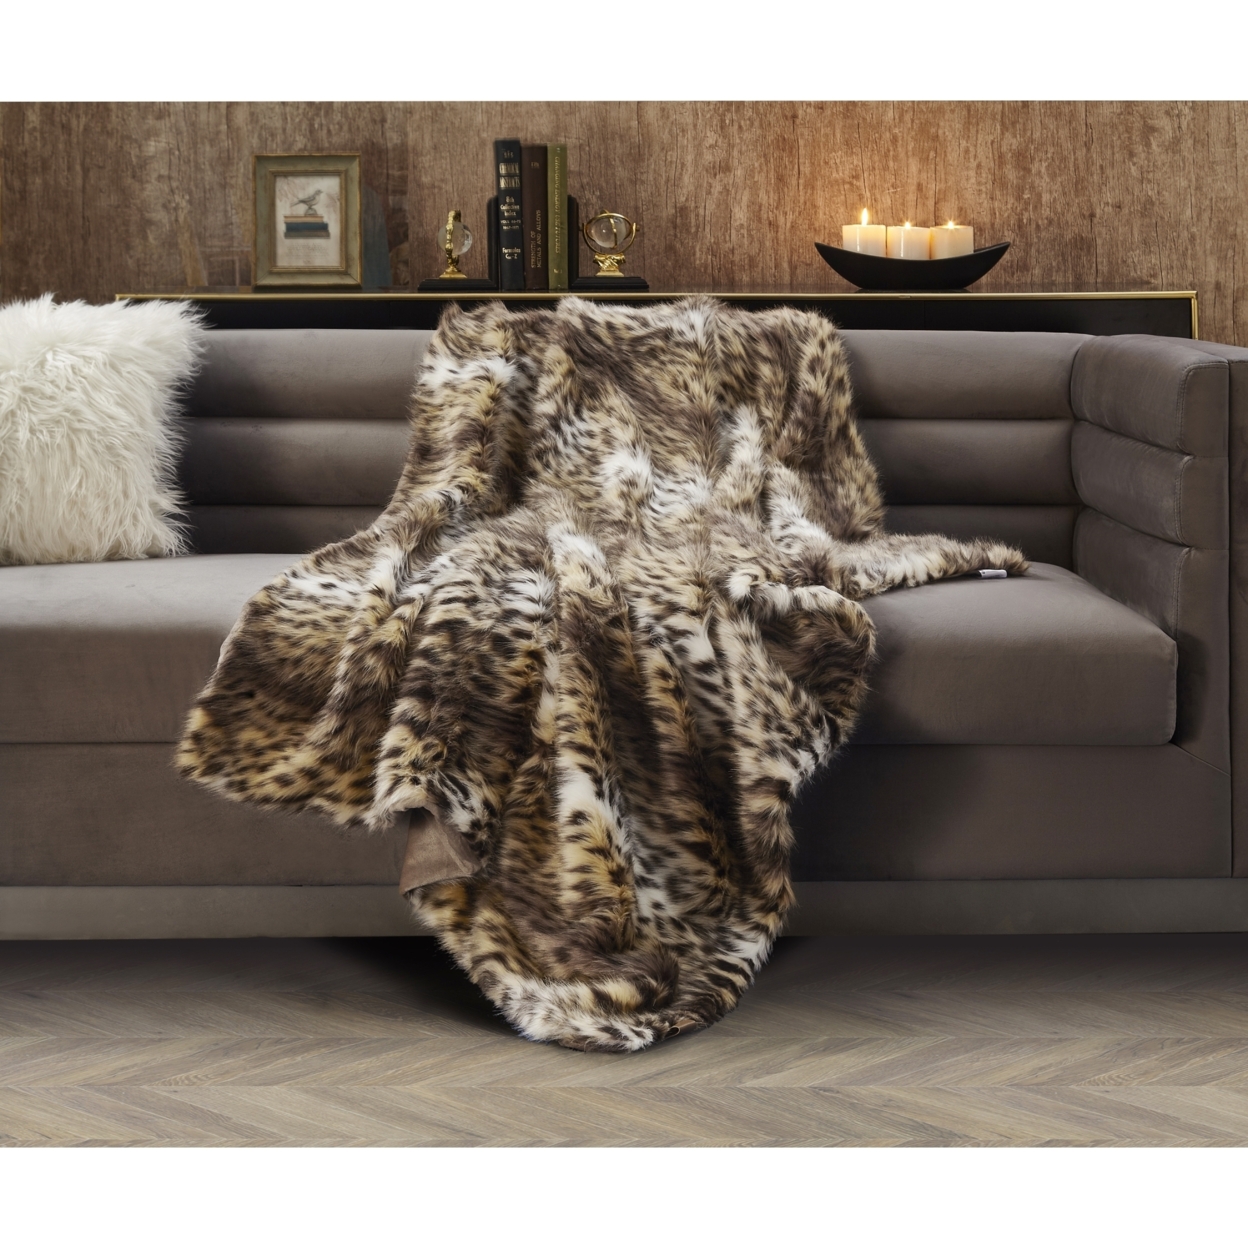 Avani Throw- Faux-Shaggy And Snuggly-Fluffy Cozy Texture - Brown Leopard